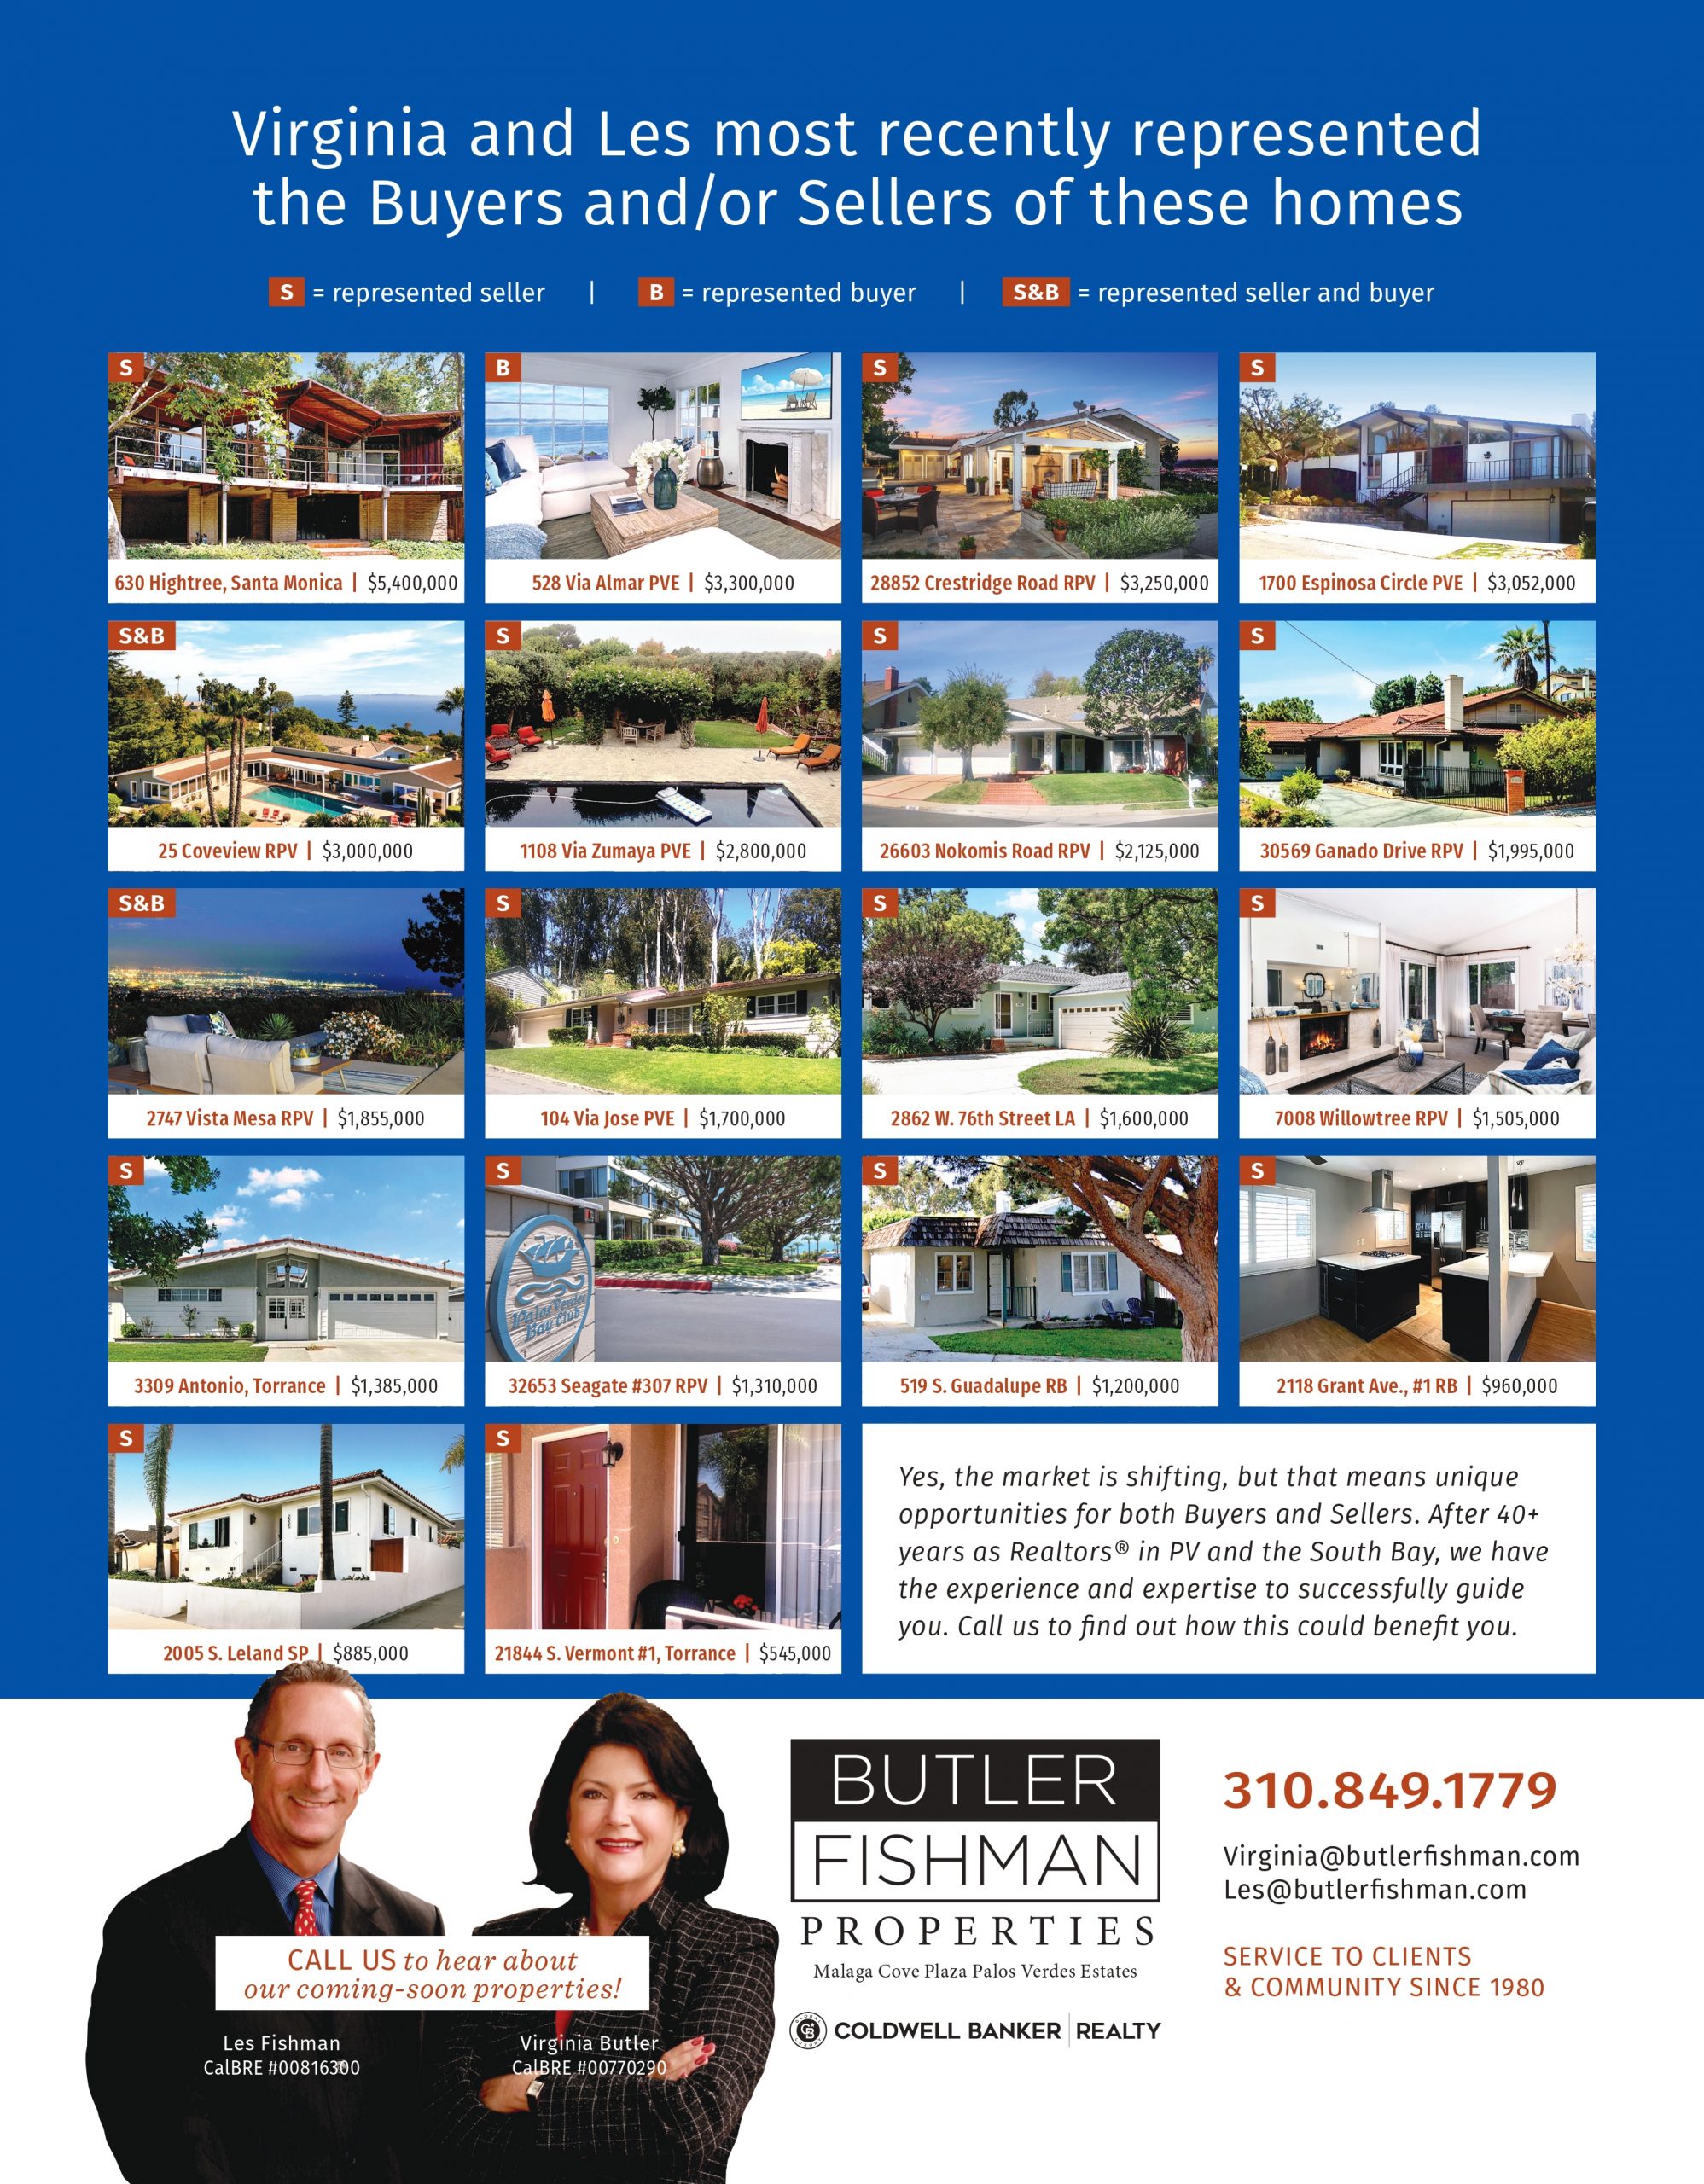 DIGS #2_21 April 2023 issue_Butler-Fishman ad_page-0001